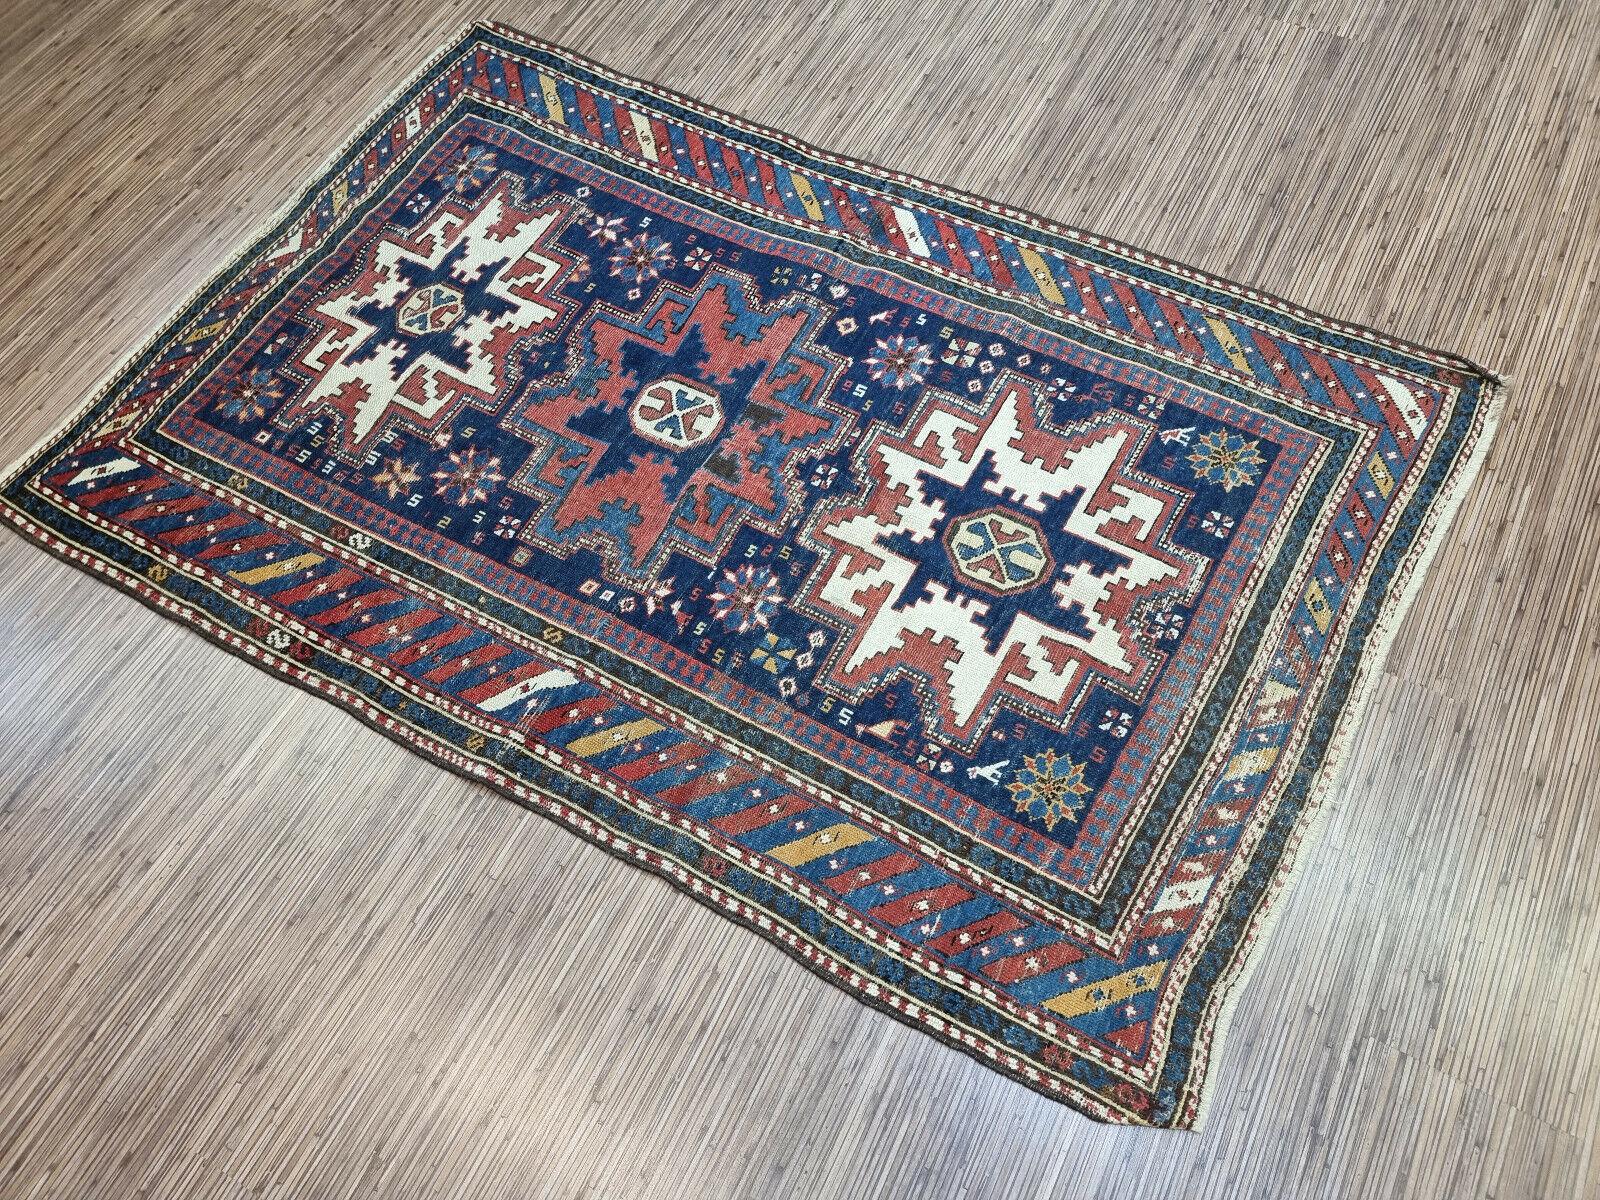 Hand-Knotted Handmade Antique Caucasian Shirvan Rug 3.4' x 5.2', 1900s - 1D89 For Sale